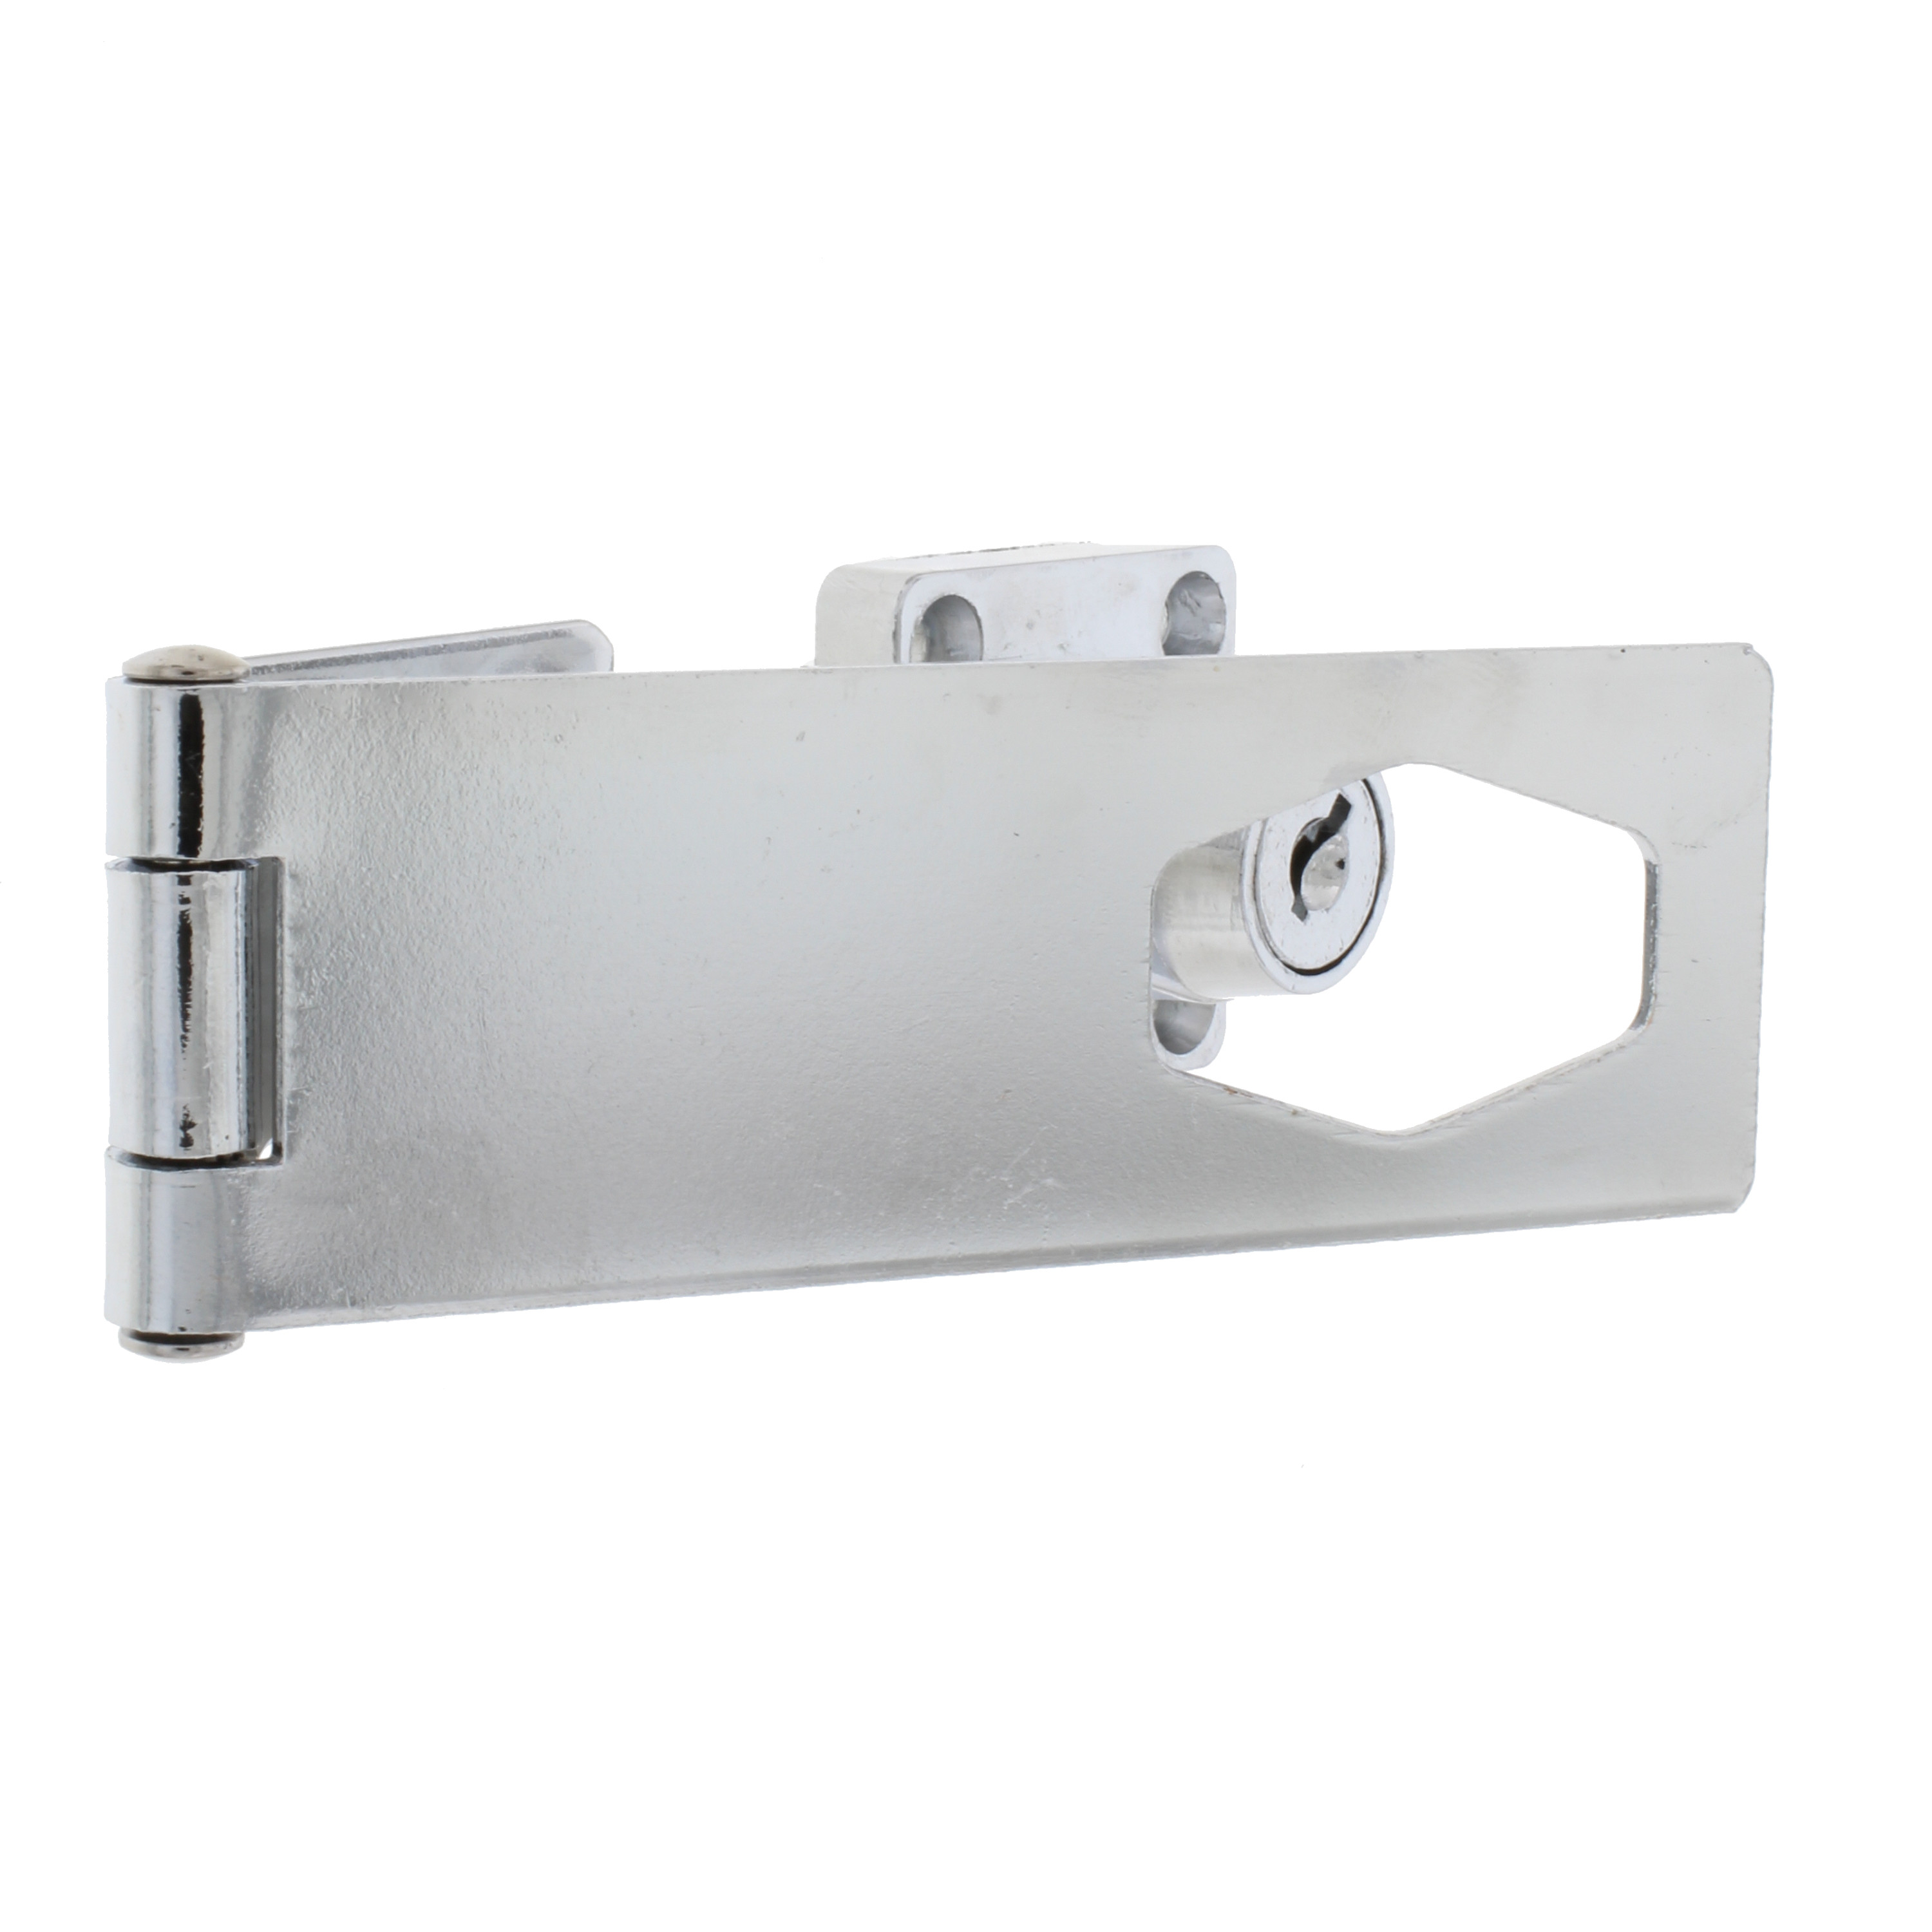 4-1/2 in. Key Locking Safety Hasp, Chrome Plated